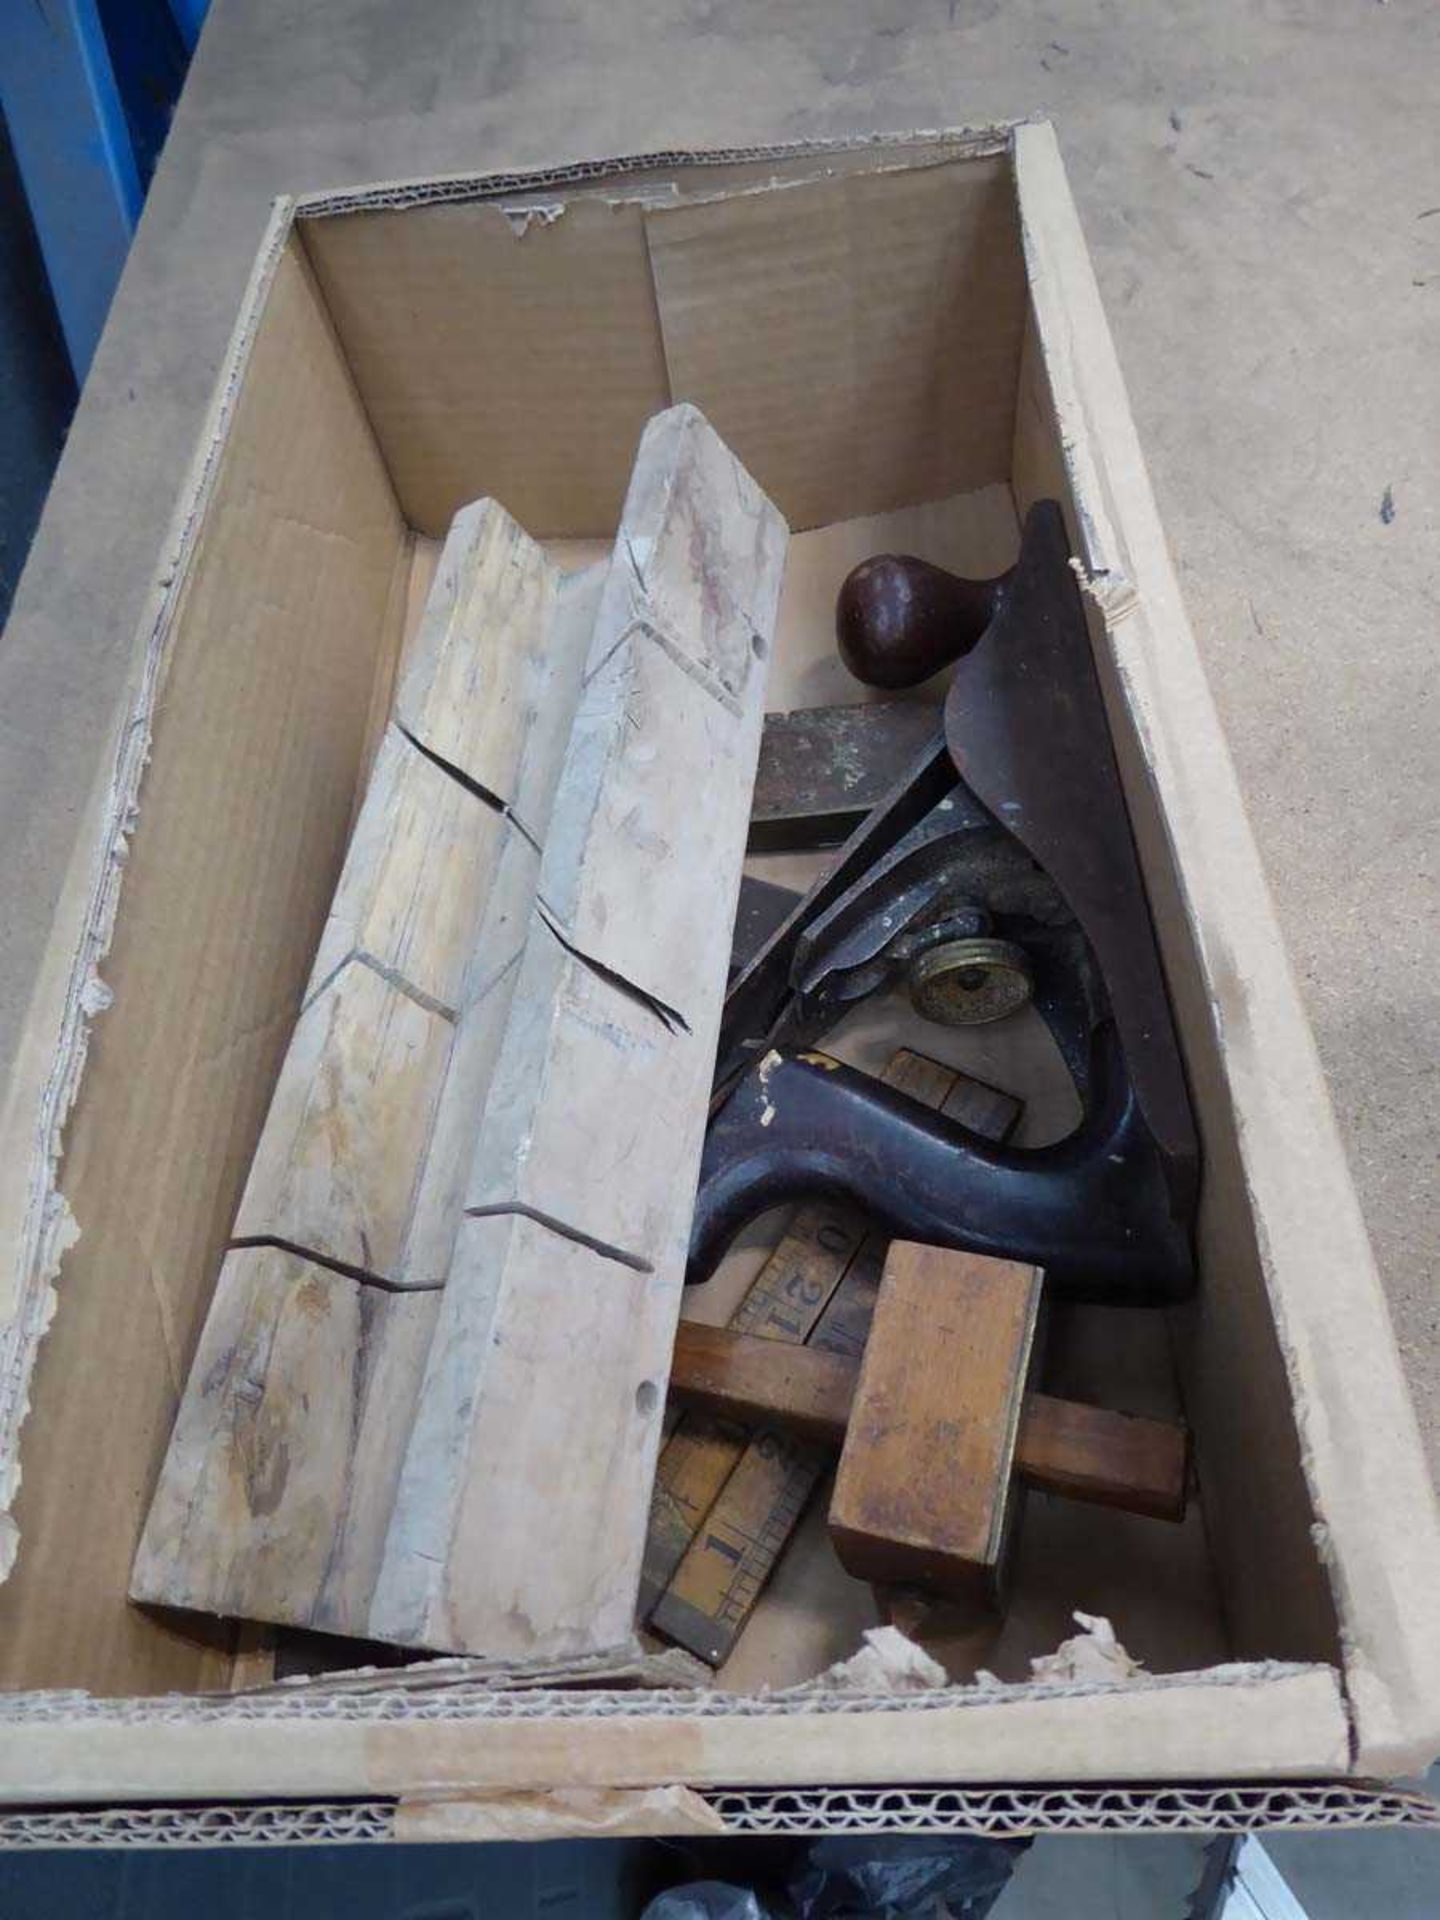 Box containing small hand plane, measure, wooden angle block, etc